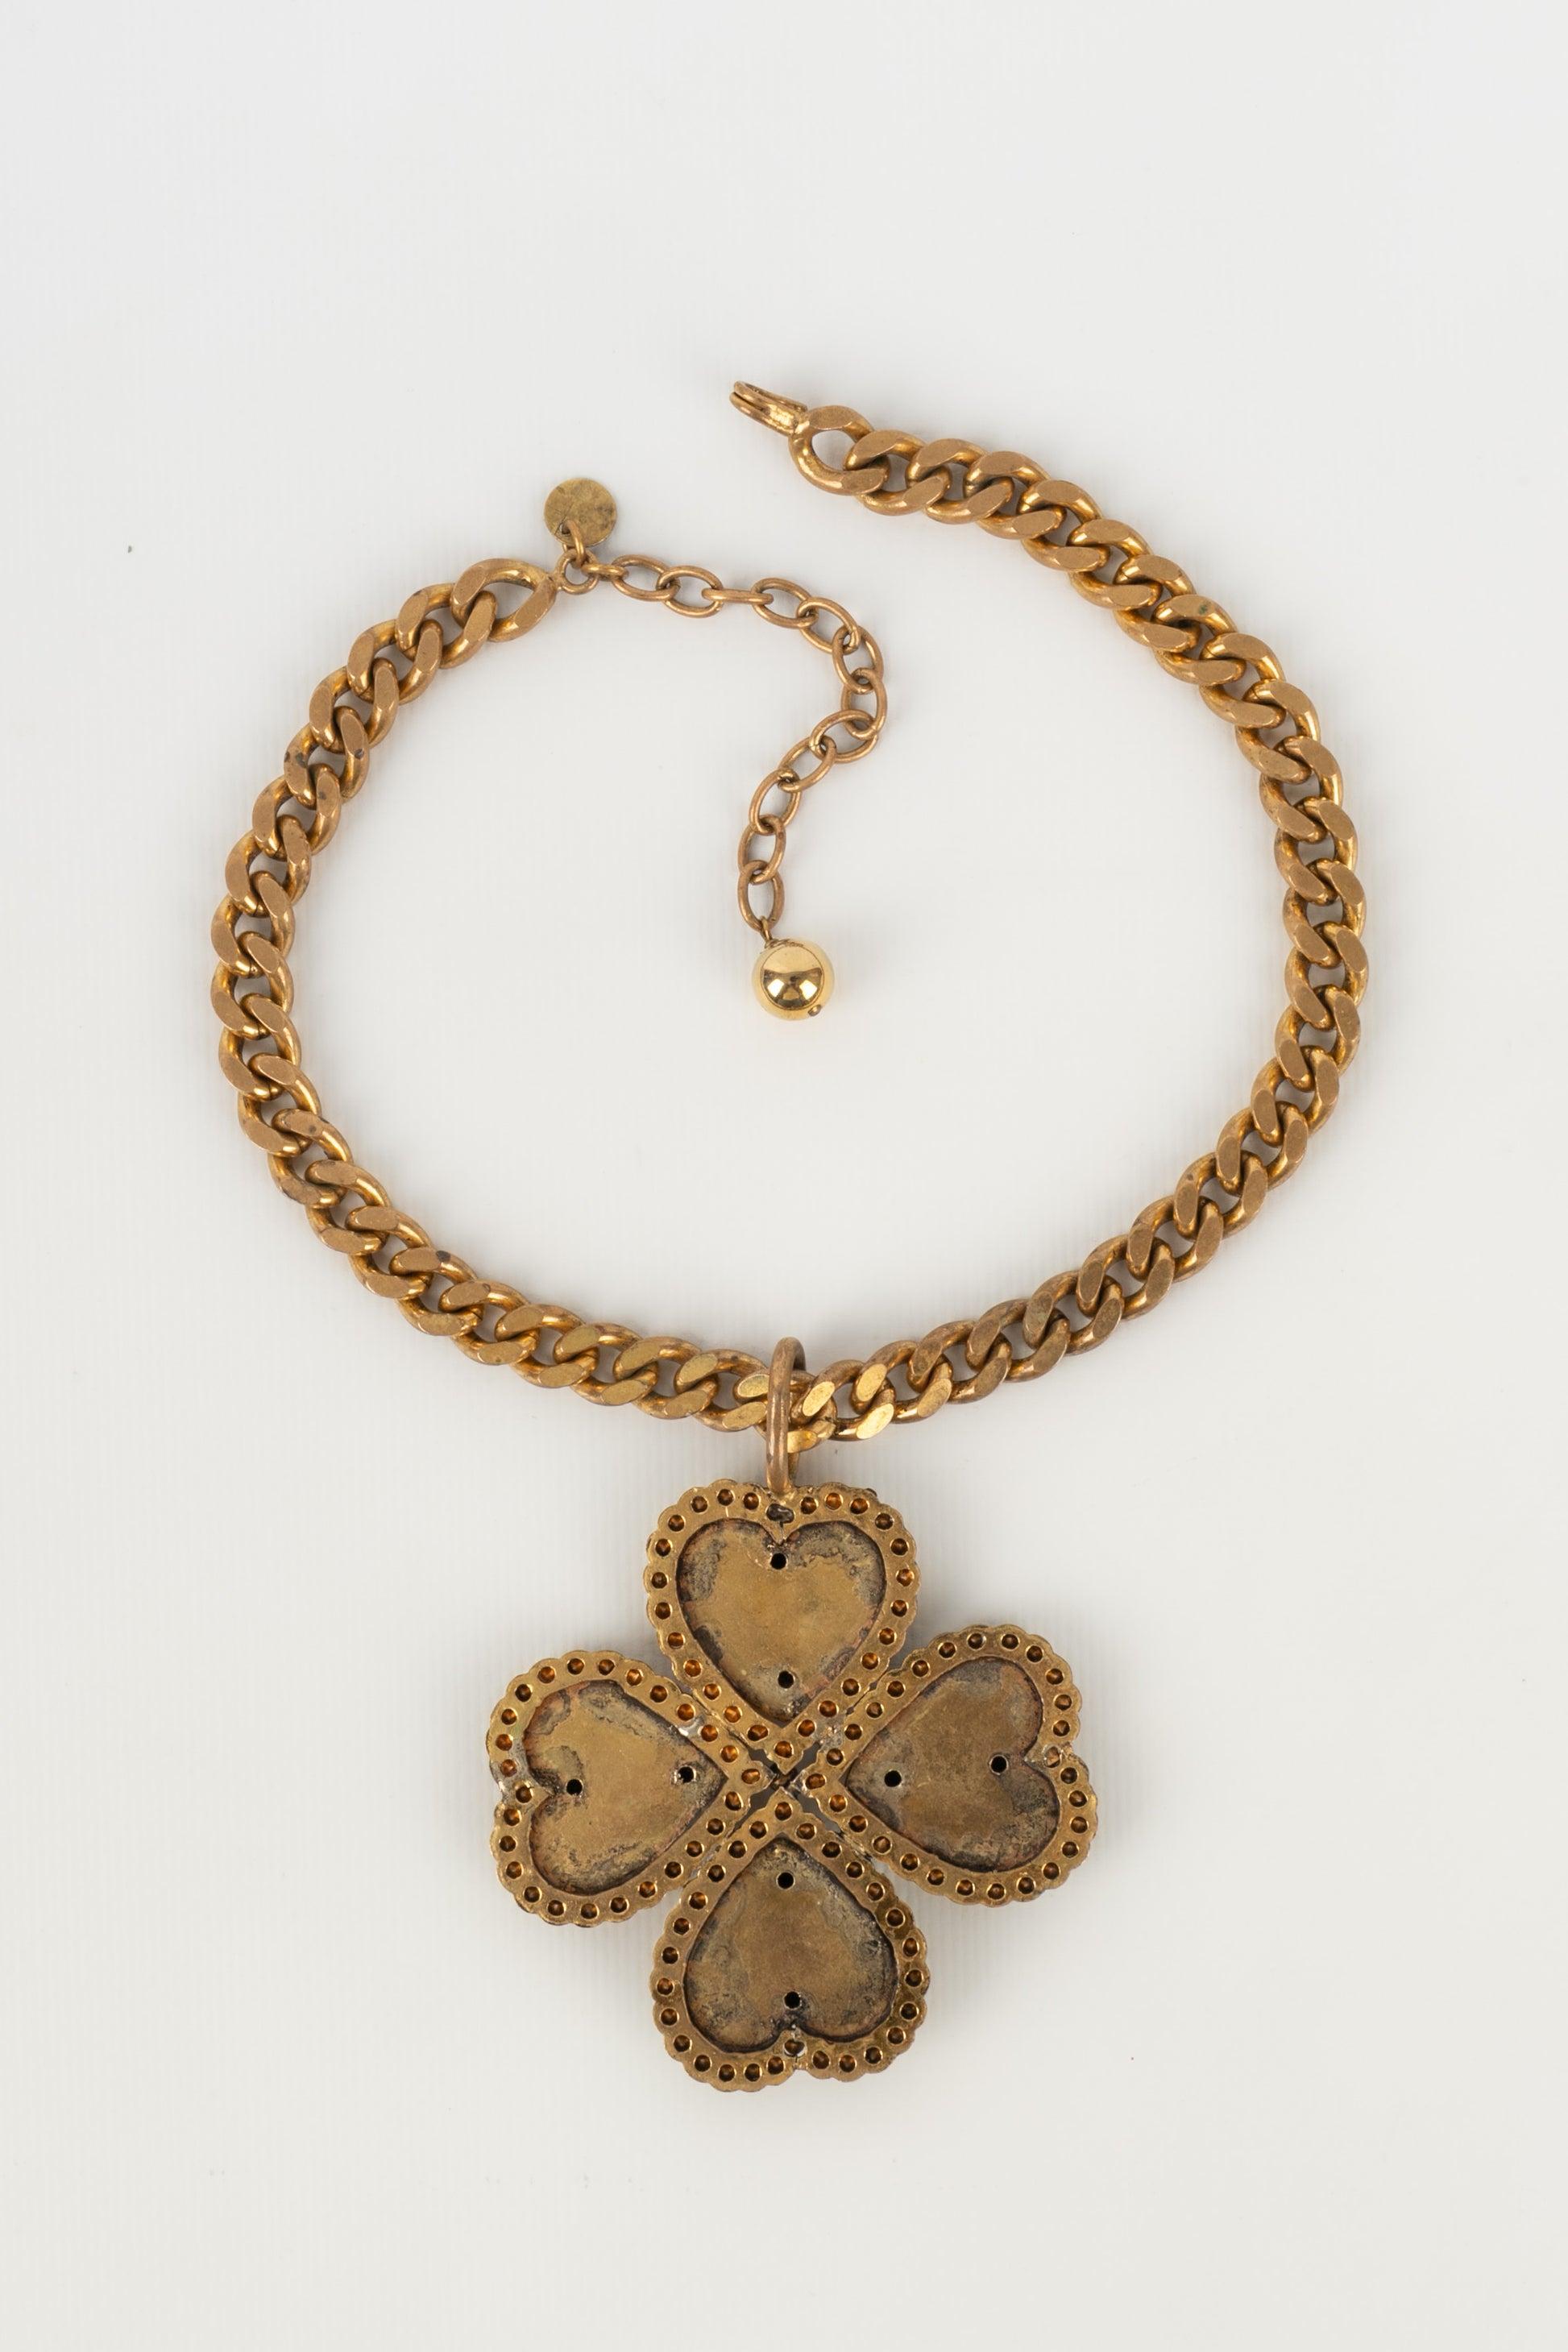 Chanel Golden Metal Necklace with a Four-leaf Clover-shaped Pendant, 1980s For Sale 3